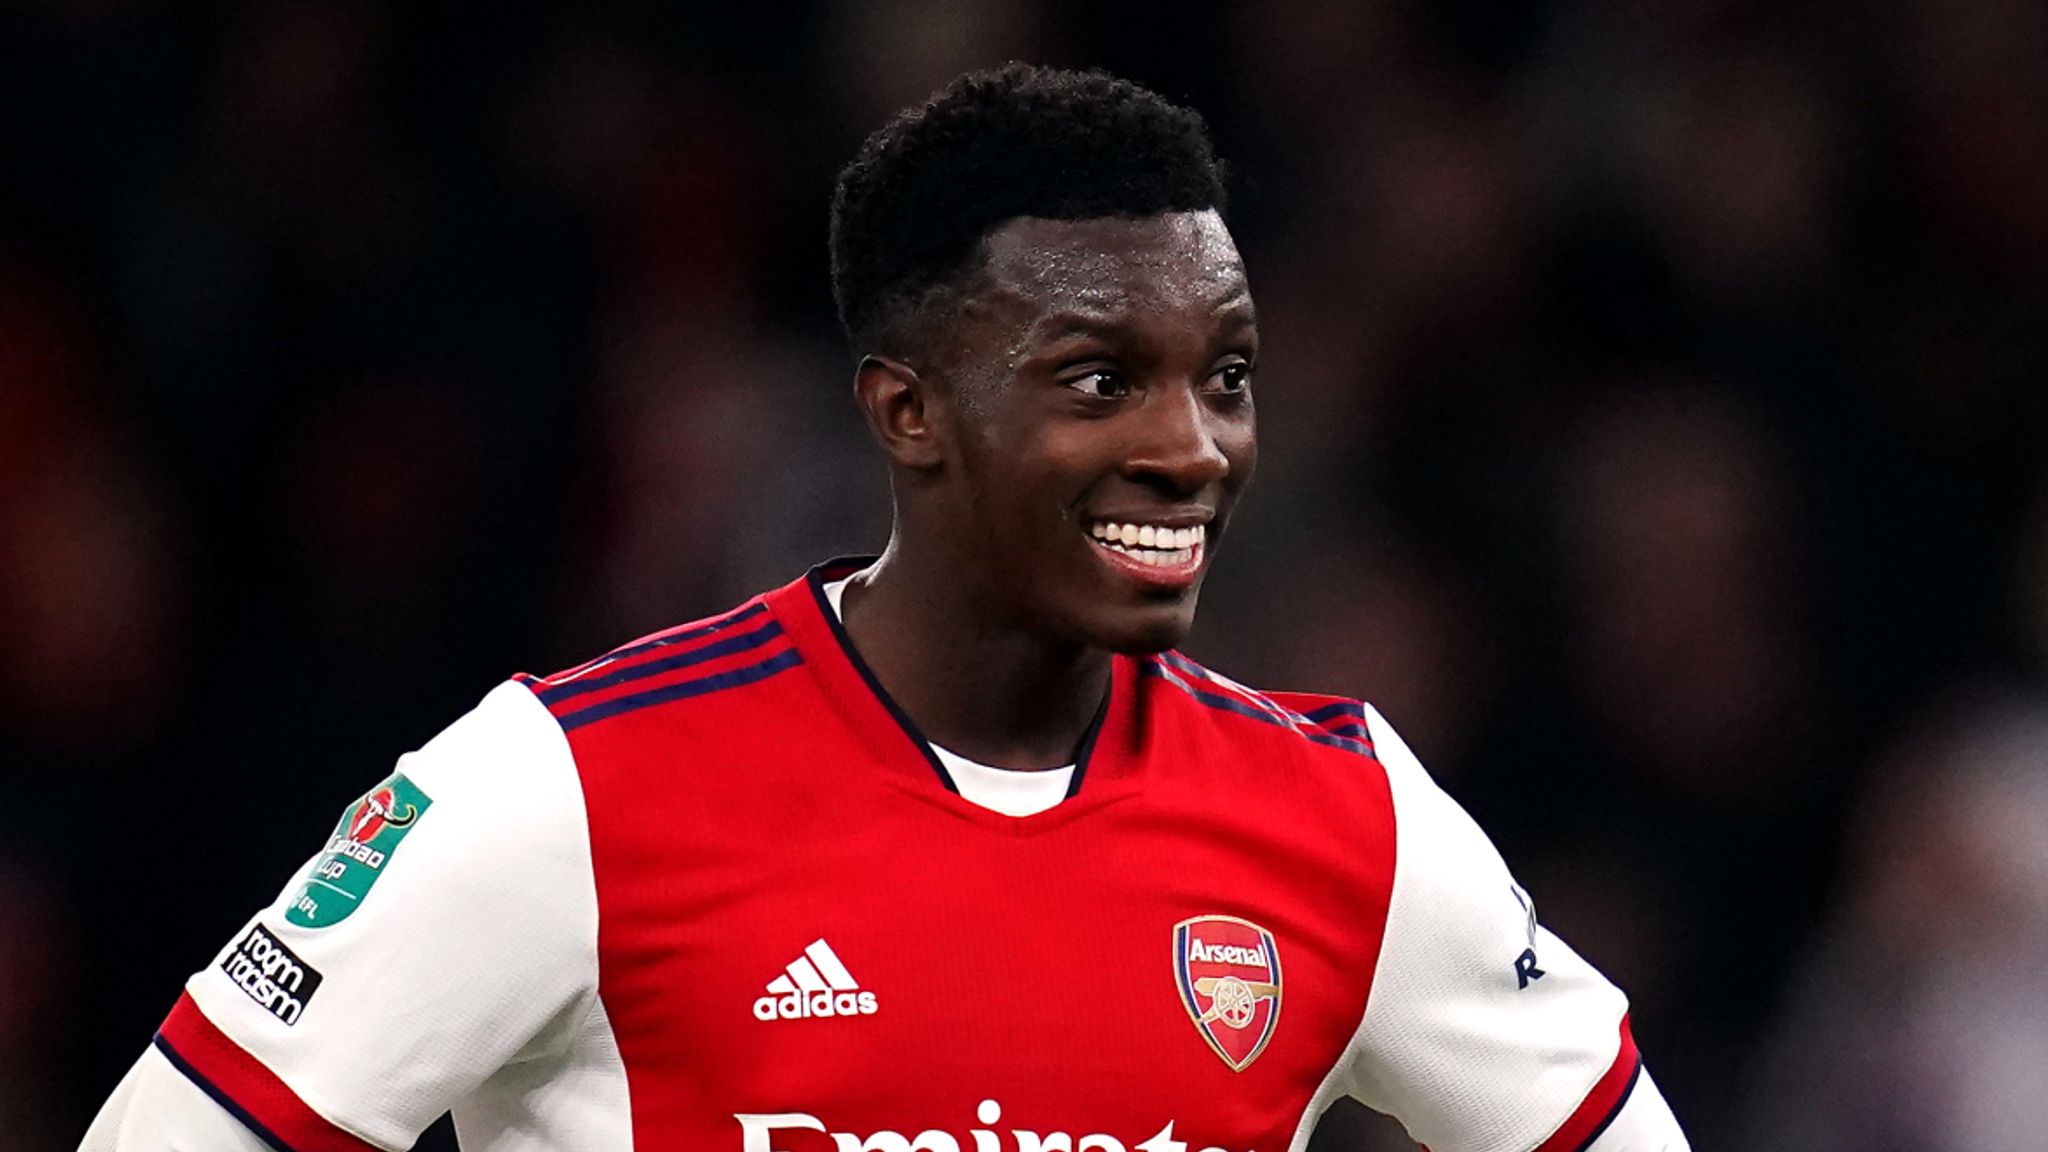  Eddie Nketiah, a professional football player, is pictured playing for Arsenal Football Club.